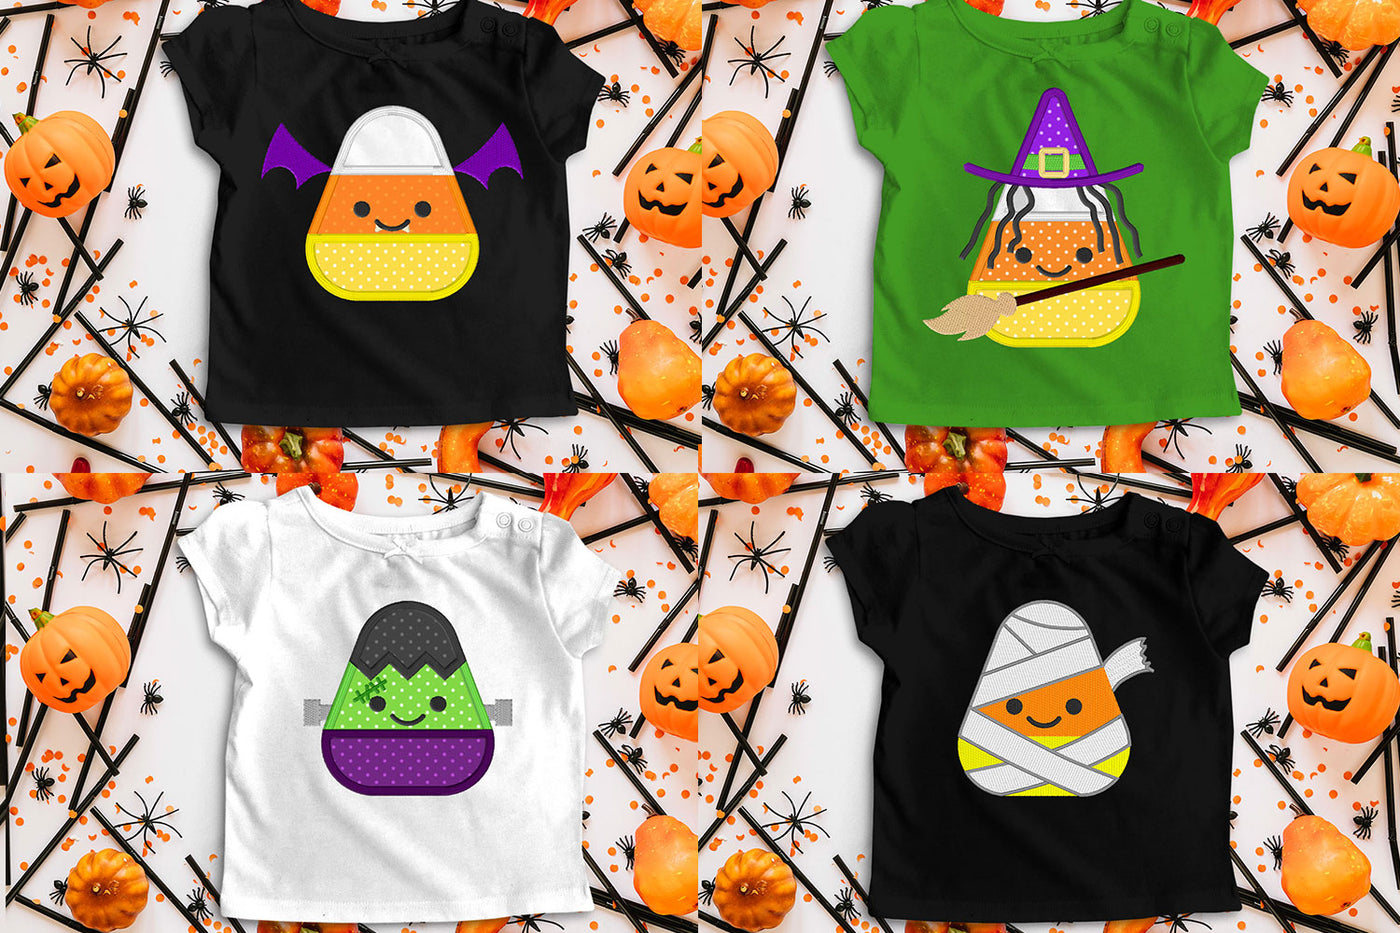 costumed candy corn Halloween applique embroidery file bundle of 4 designs including a vampire bat, witch, Frankenstein's monster, and mummy